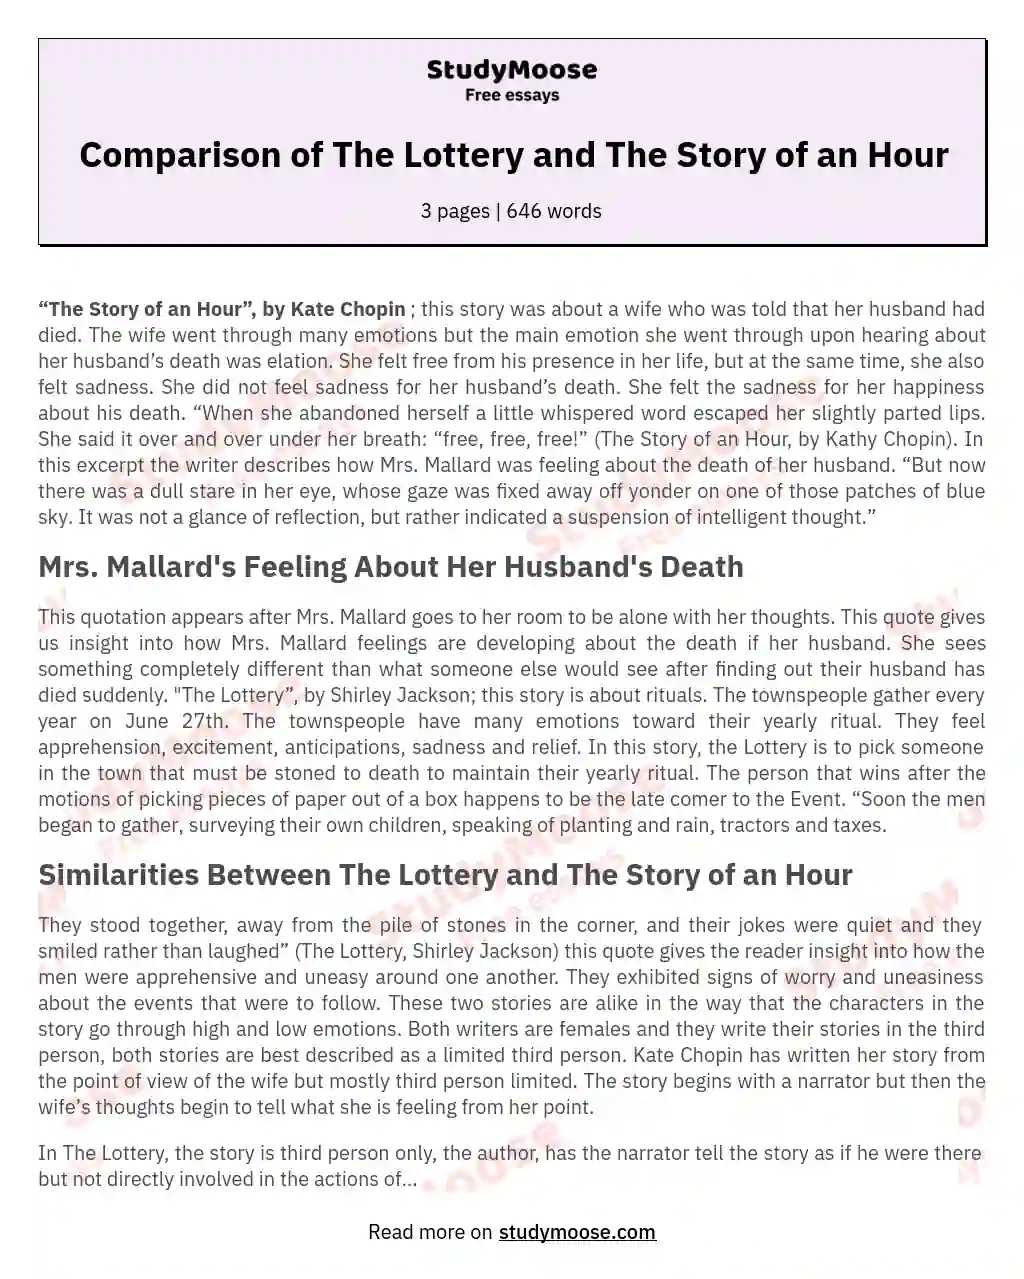 Comparison of The Lottery and The Story of an Hour essay